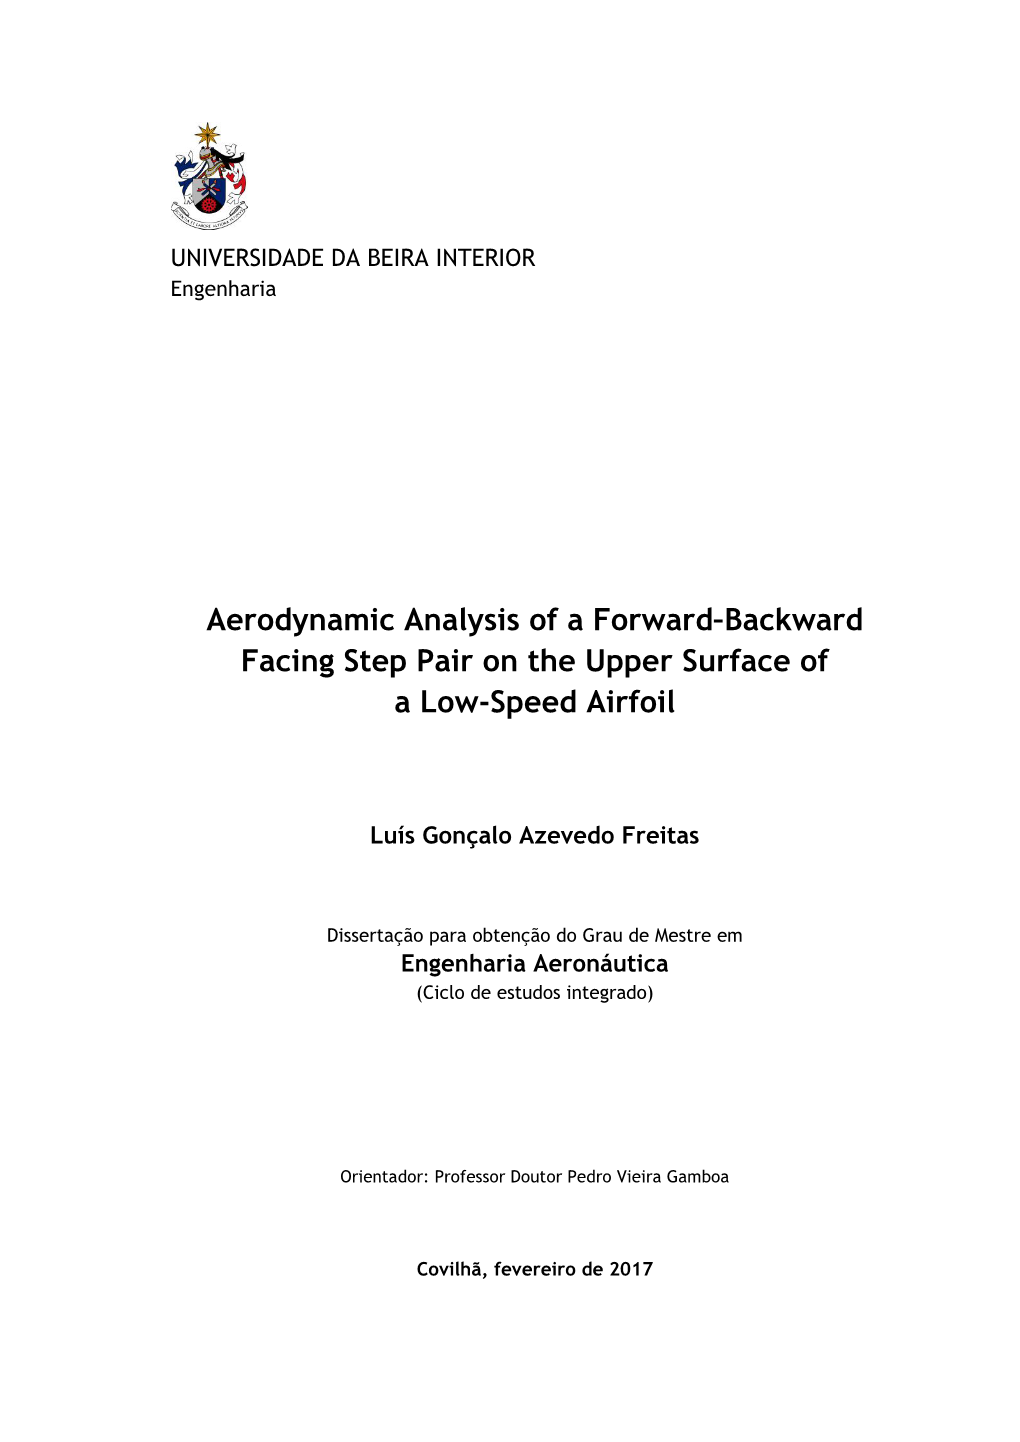 Aerodynamic Analysis of a Forward–Backward Facing Step Pair on the Upper Surface of a Low-Speed Airfoil